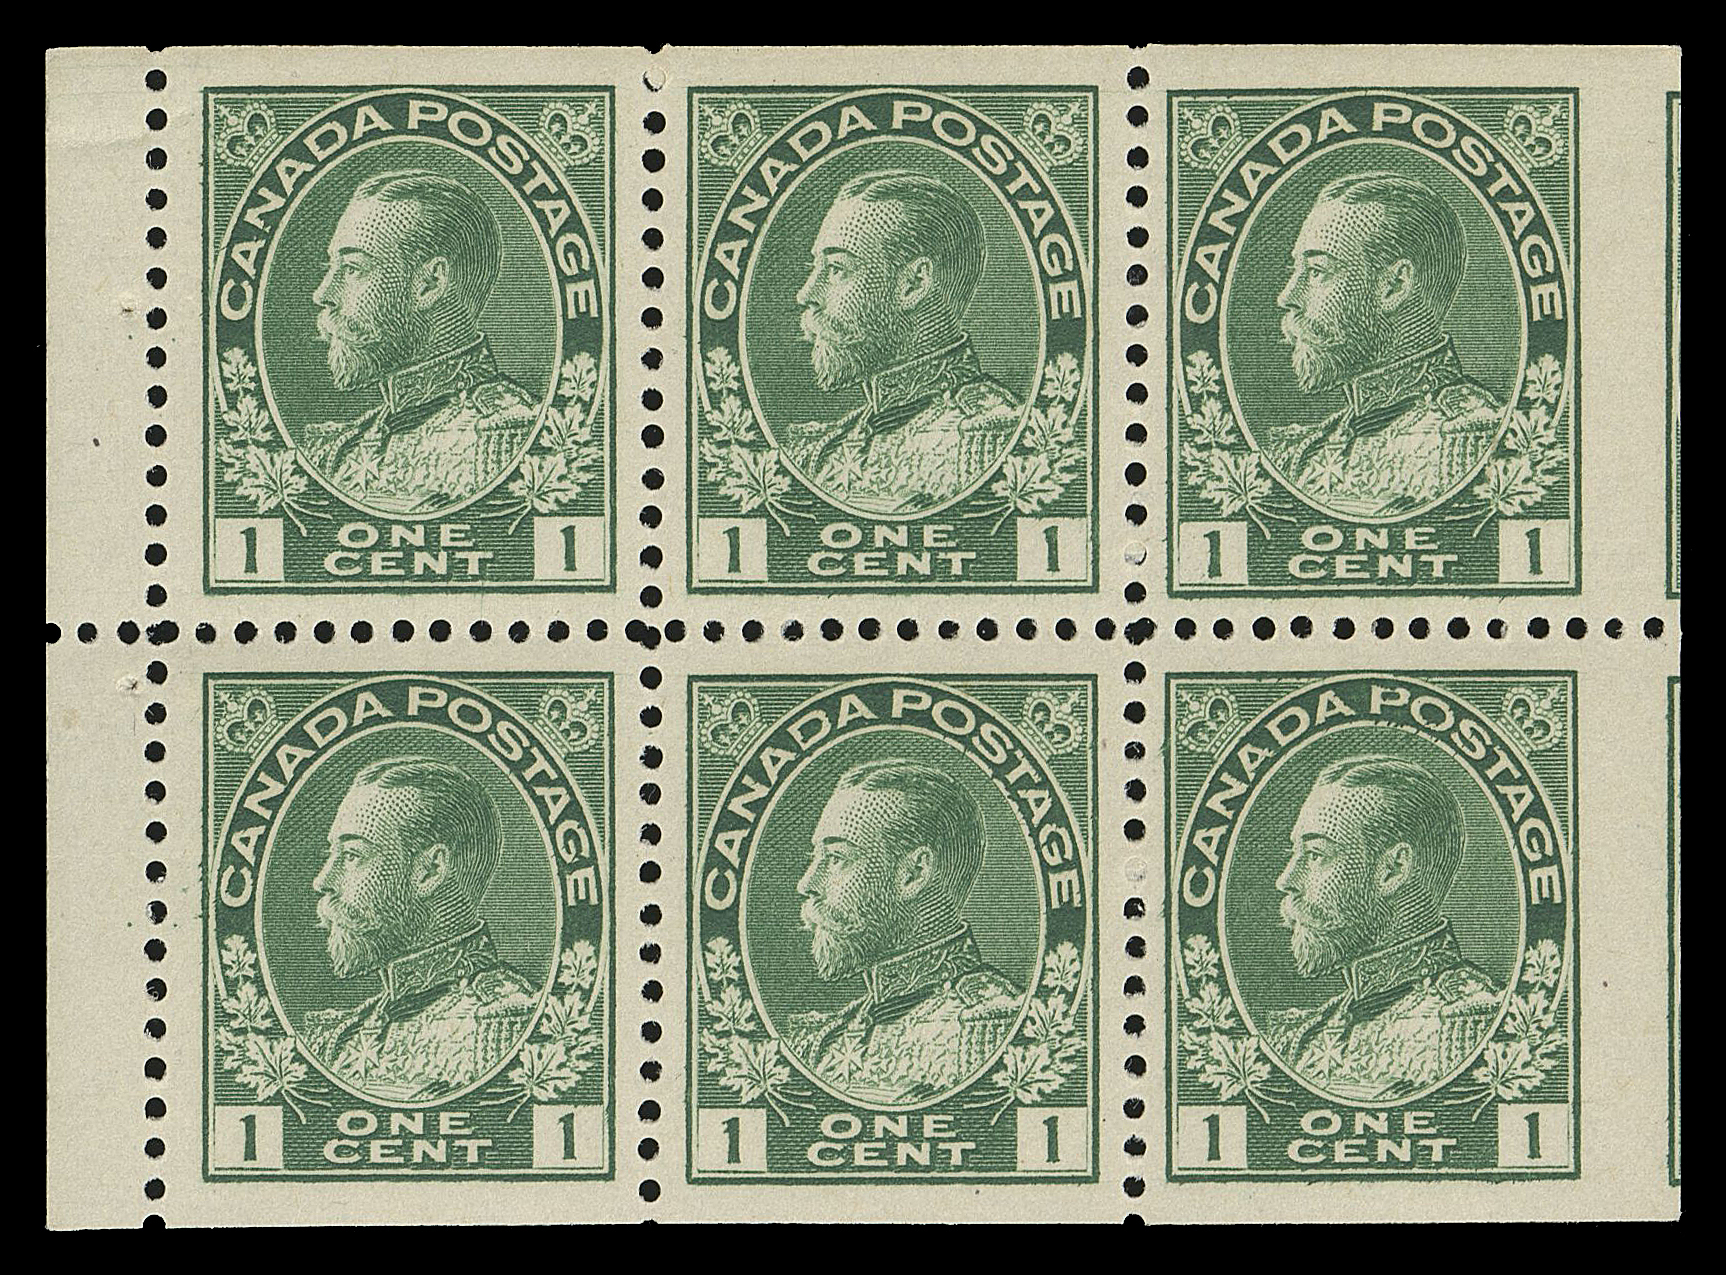 ADMIRAL STAMPS  141f variety,A very well centered mint booklet pane of six, mis-guillotined resulting in small portion of tête-bêche pane visible at right, appealing and unusual, VF LH